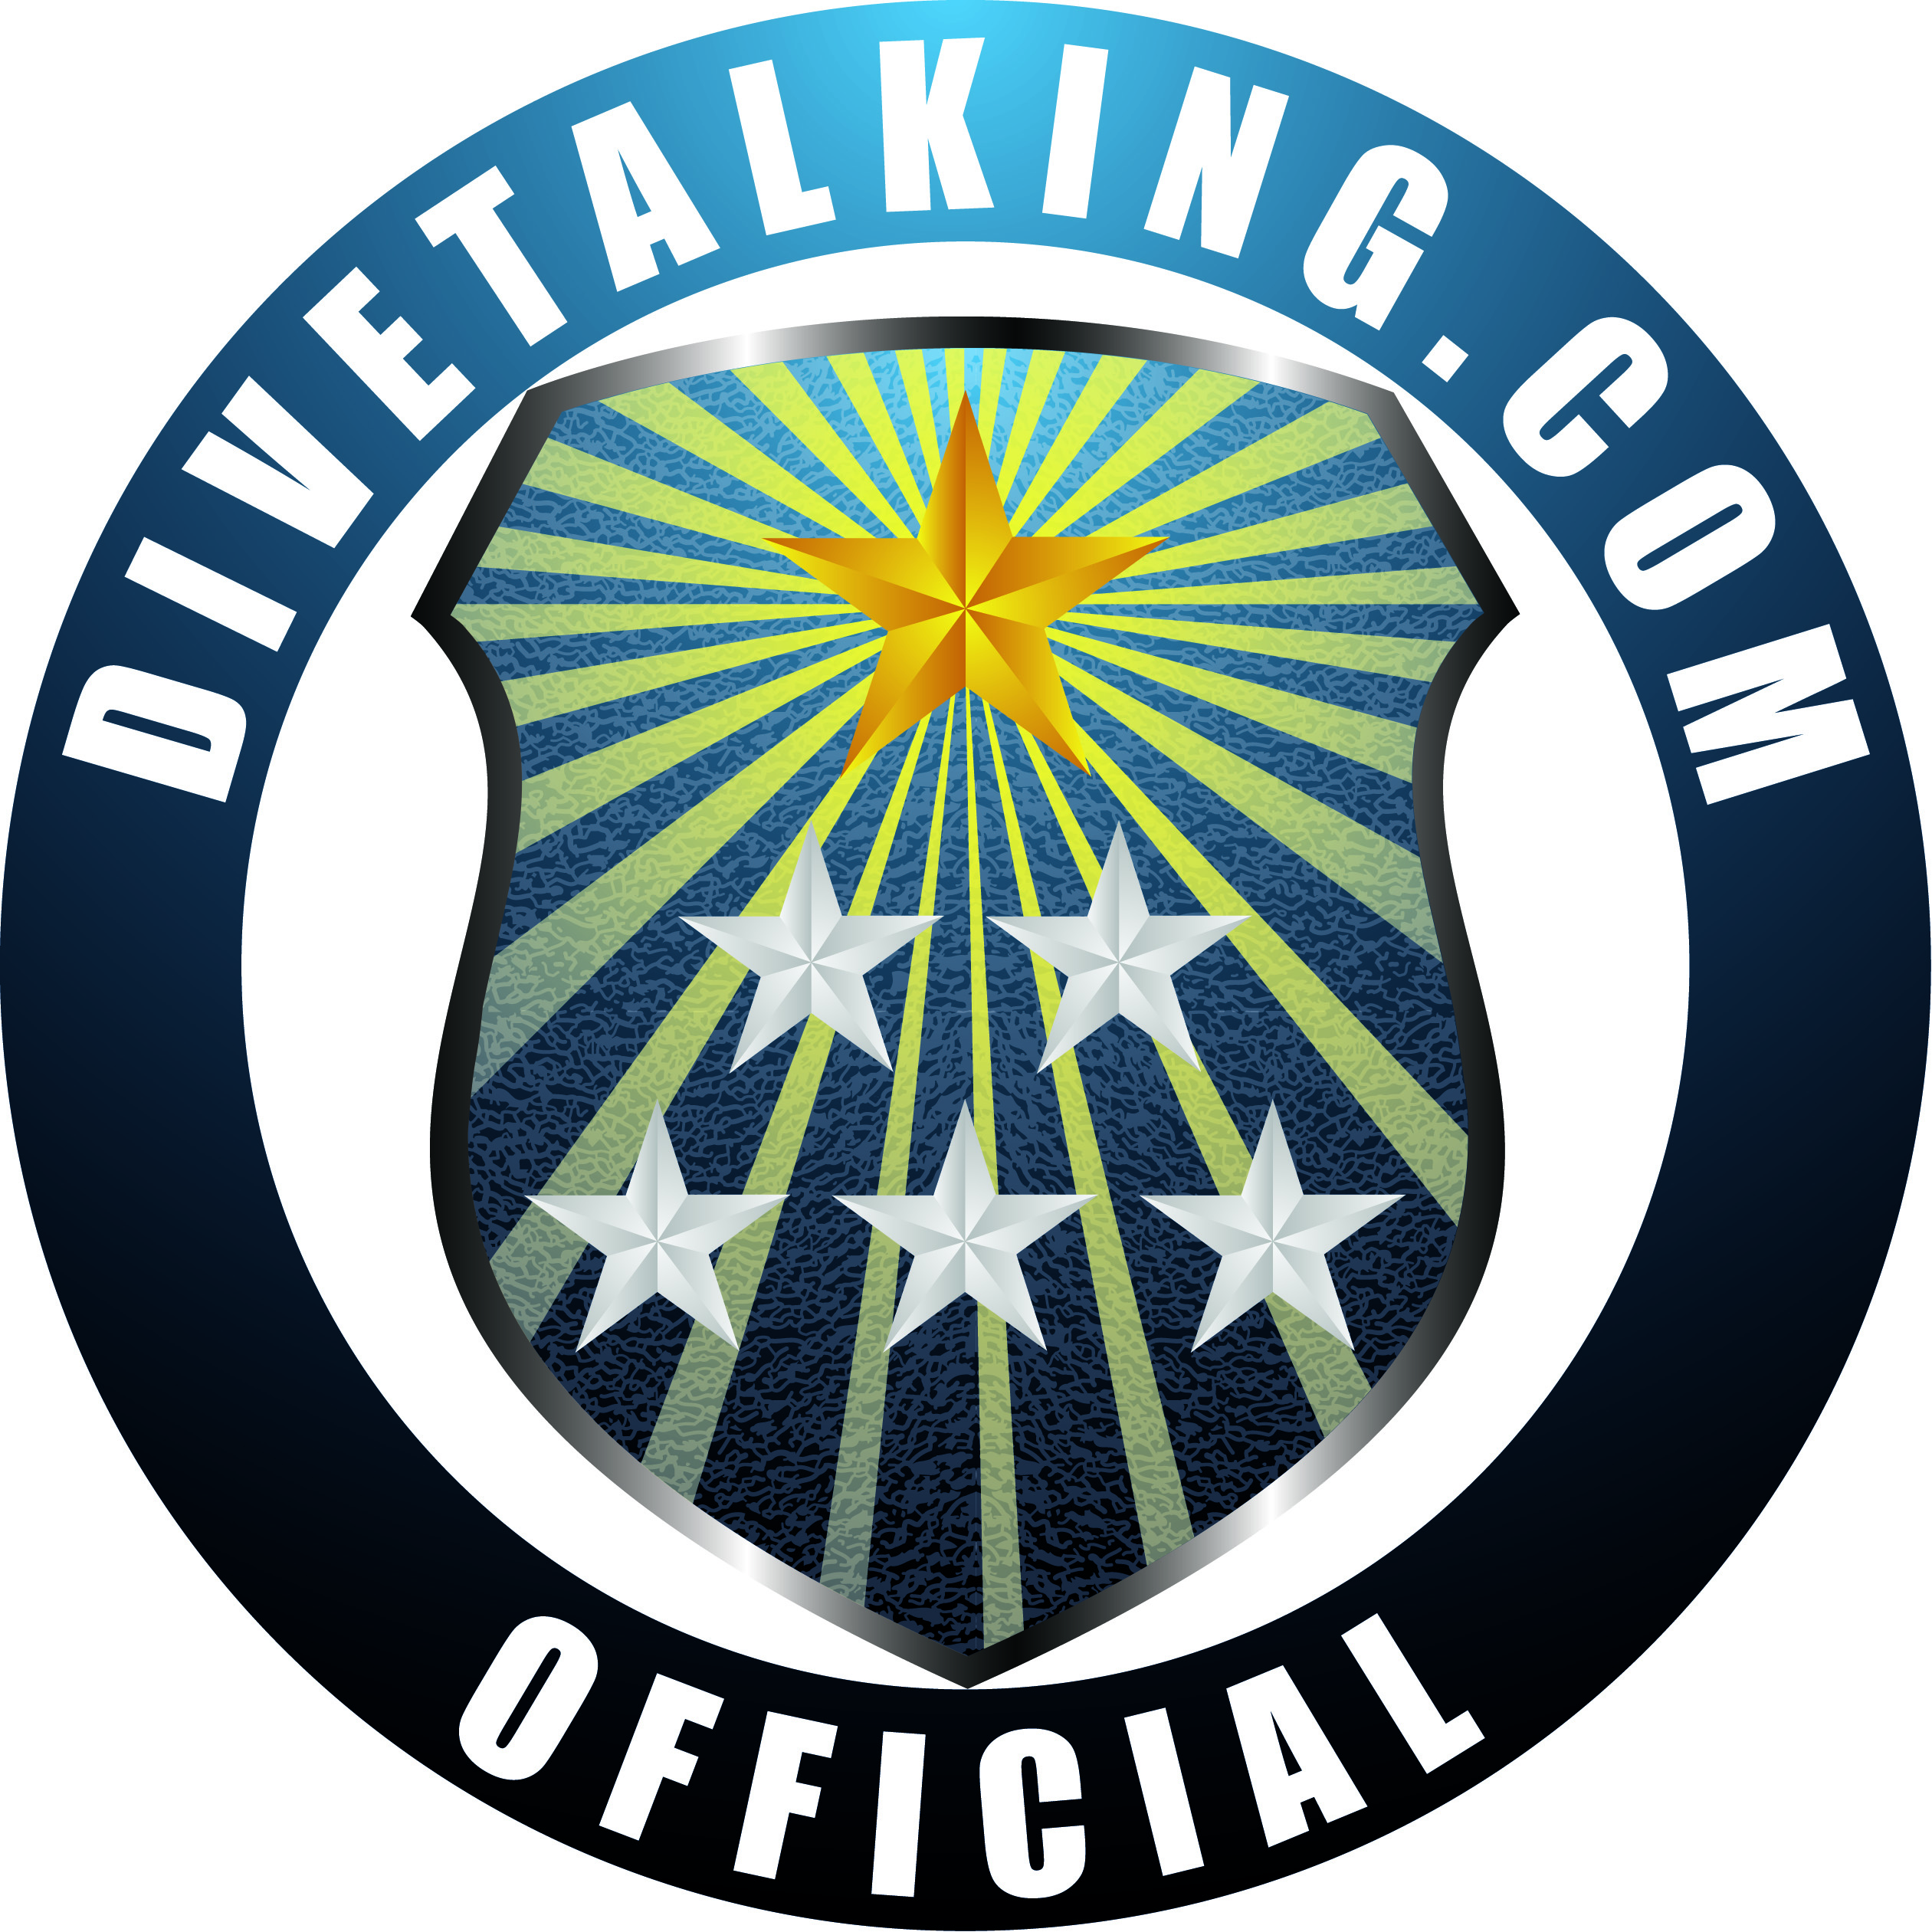 Show your support by displaying Divetalkings official logo